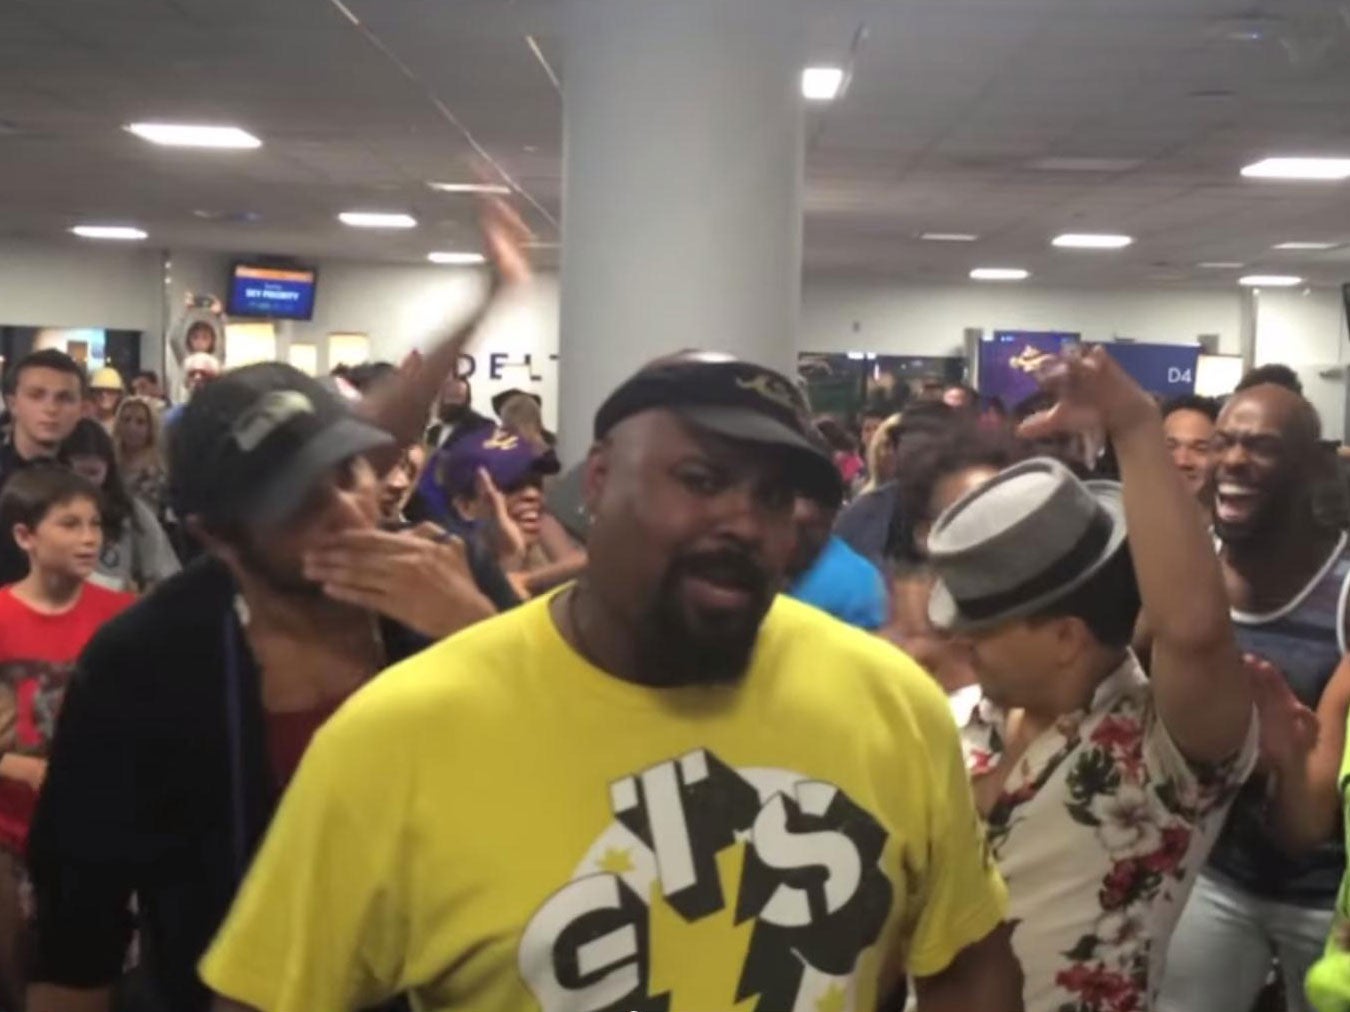 The Genie from Aladdin led a freestyle rap at LaGuardian Airport in New York